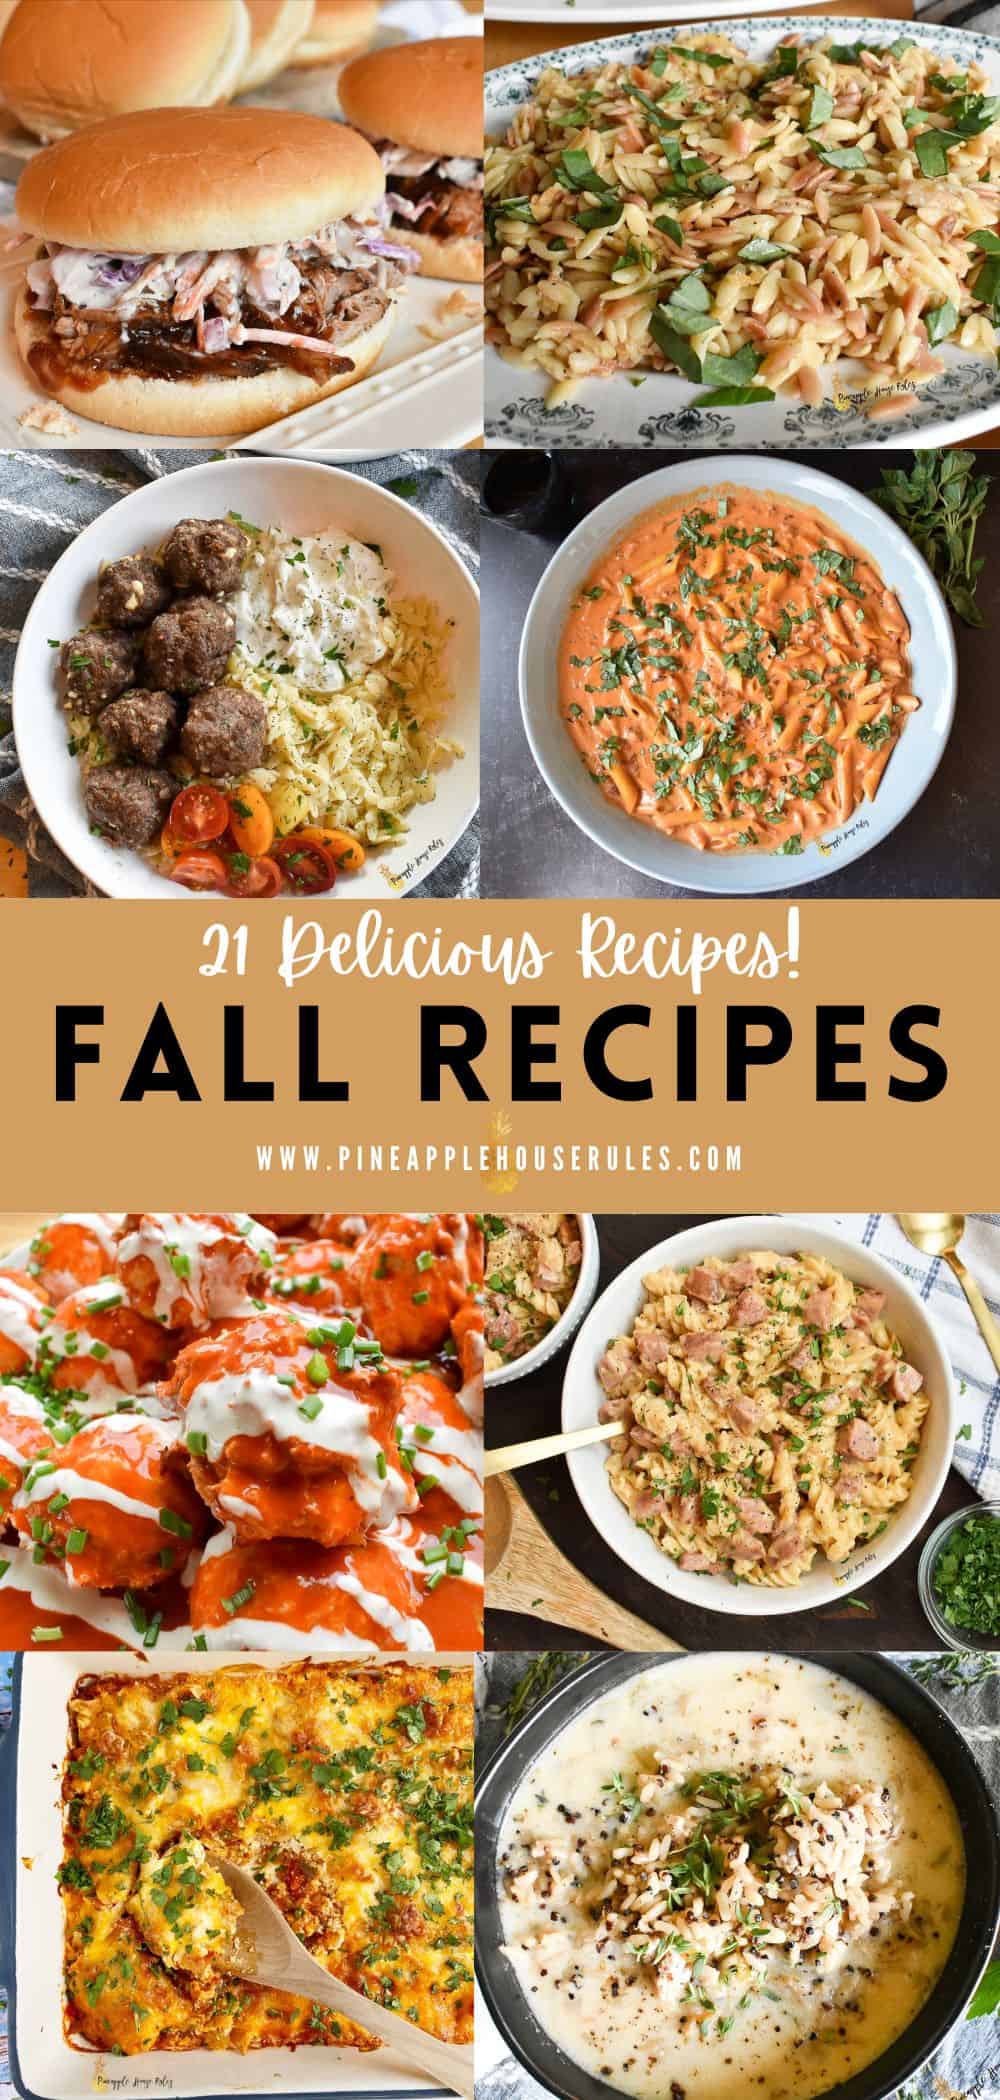 This recipe roundup of Fall Recipes is full of delicious, comforting, savory food that will bring a smile to your loved ones! There are 21 delicious recipes to choose from! Fall Recipes | Fall Recipes Dinner | Fall Recipes Dinner Crock Pots | Fall Recipes Crockpot | Fall Recipes for Kids | Fall Recipes Healthy | Fall Recipes Dinner Comfort Food | Fall Recipes Dinner Healthy | Fall Recipes Dinner Easy | Slow Cooker Recipes | Crock Pot Recipes